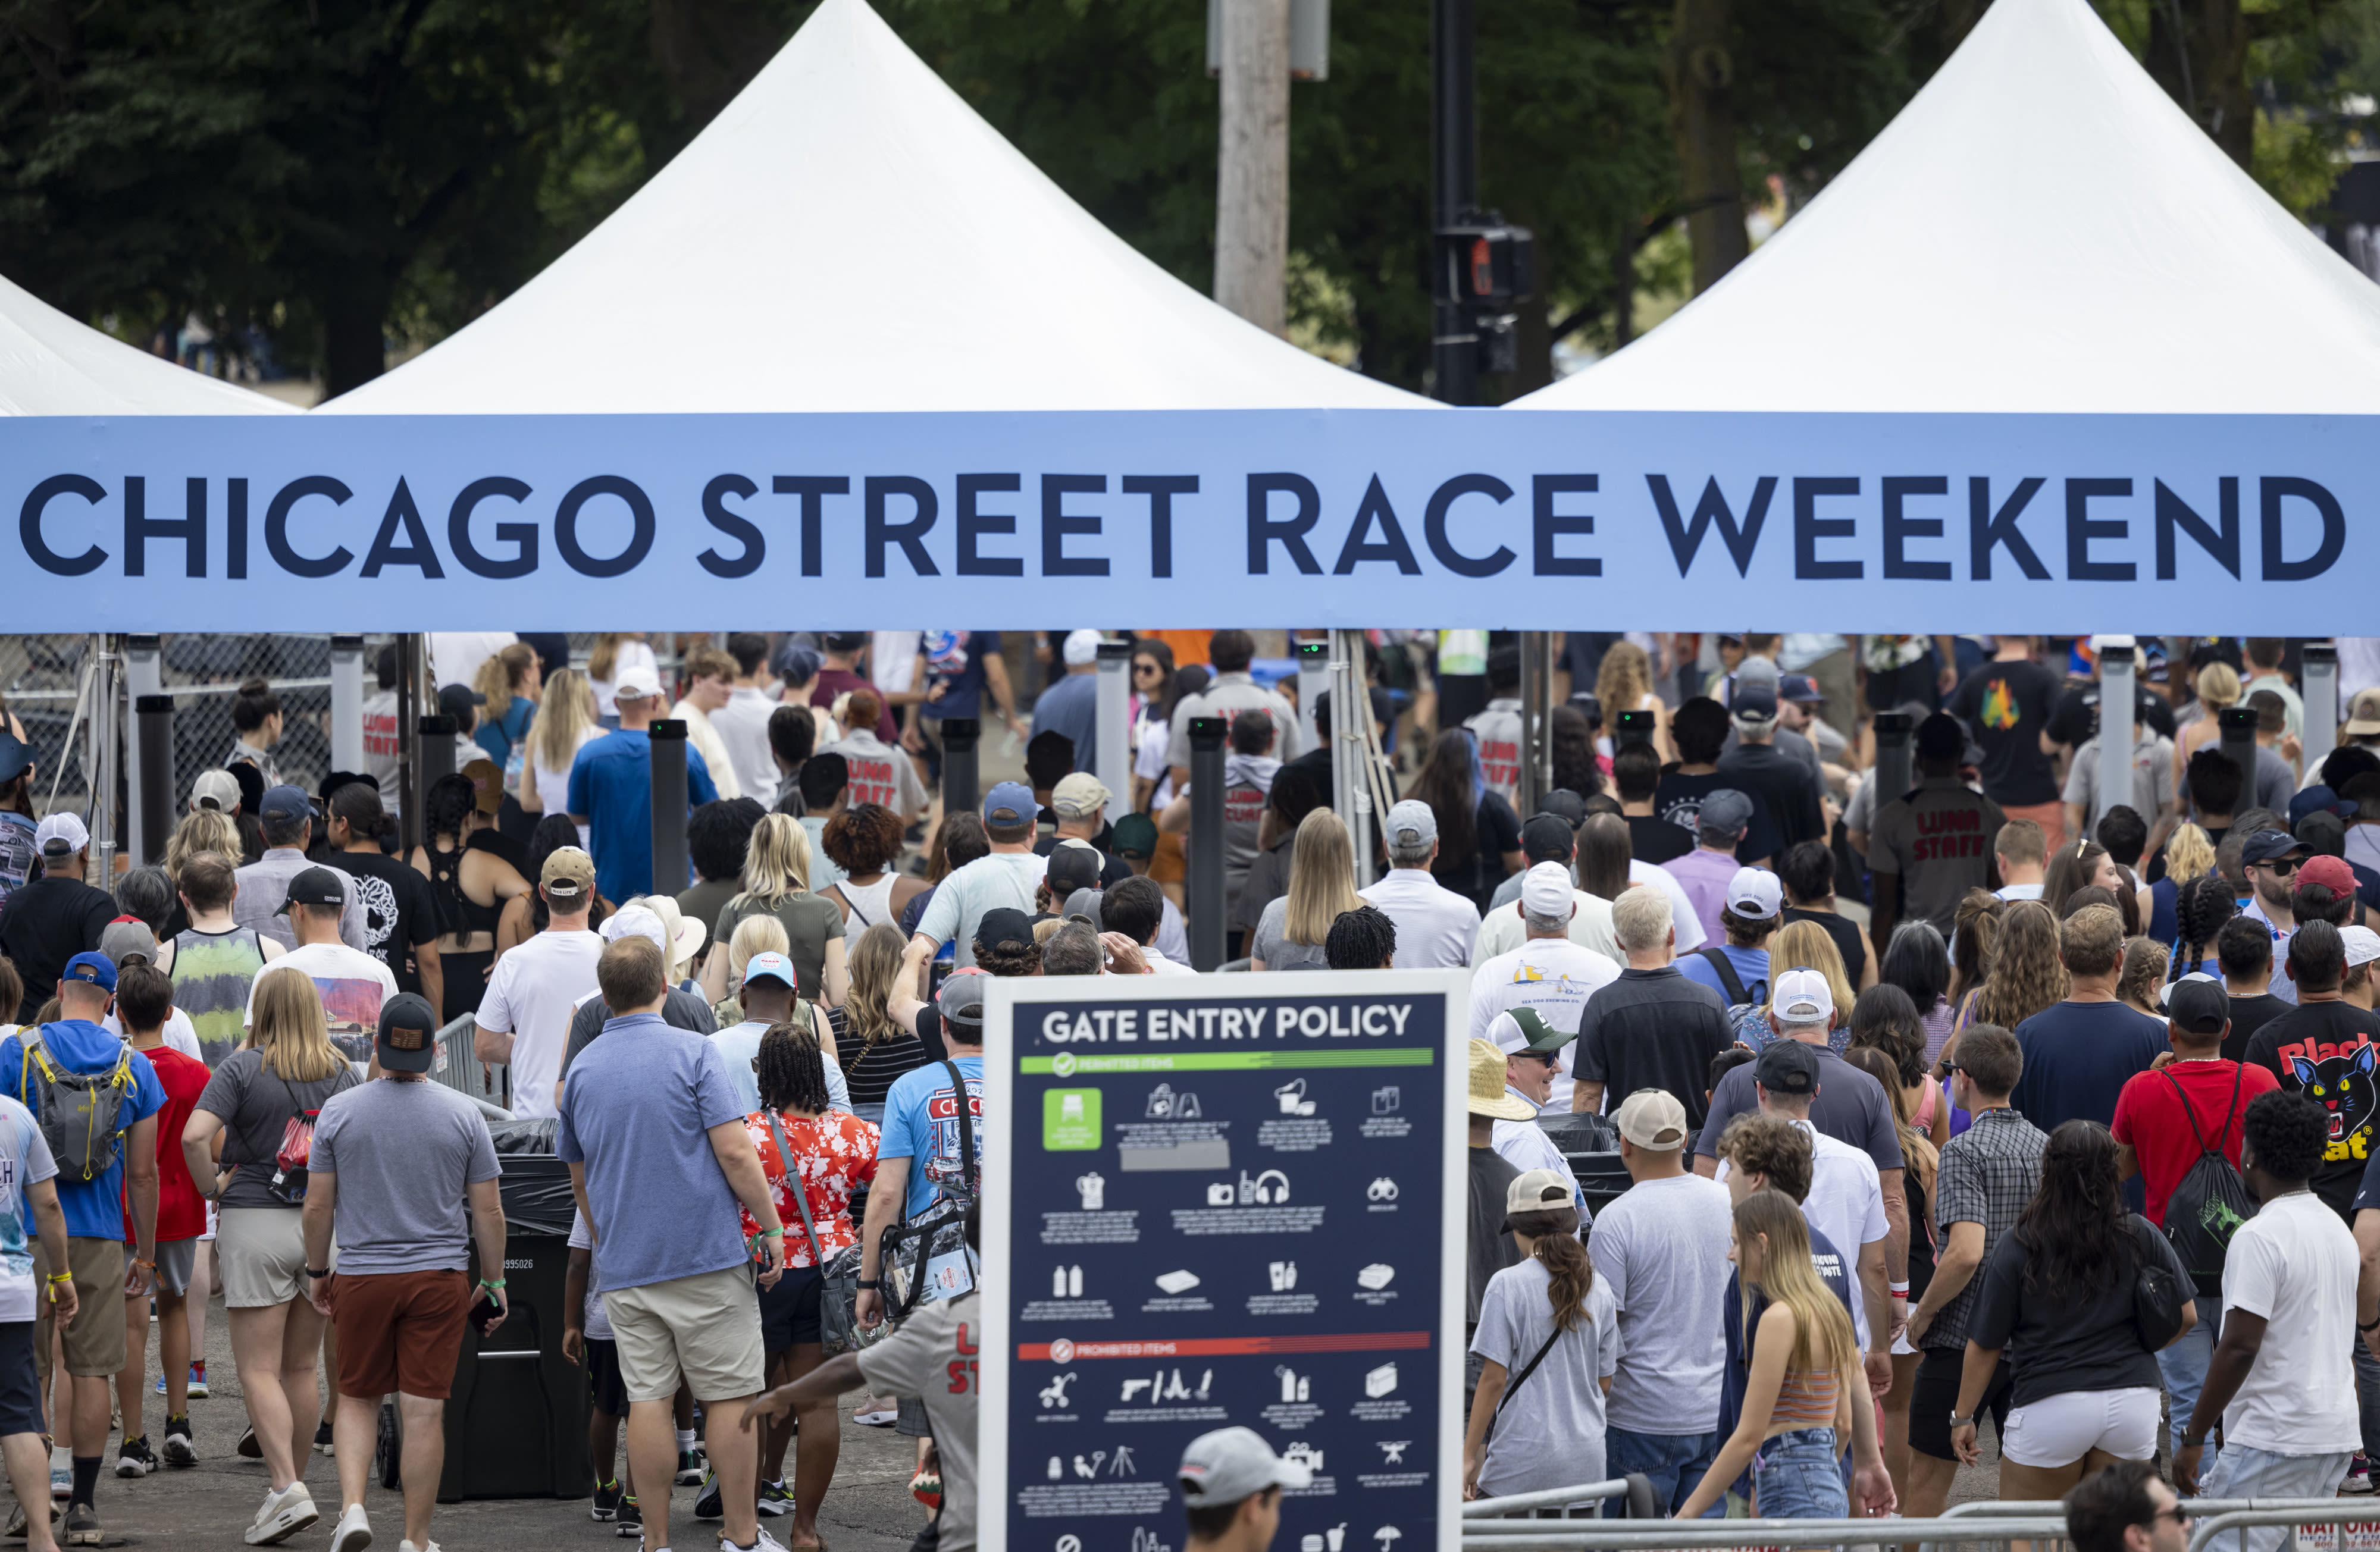 NASCAR Chicago street race: For second year in a row, rain interrupts Grant Park 165